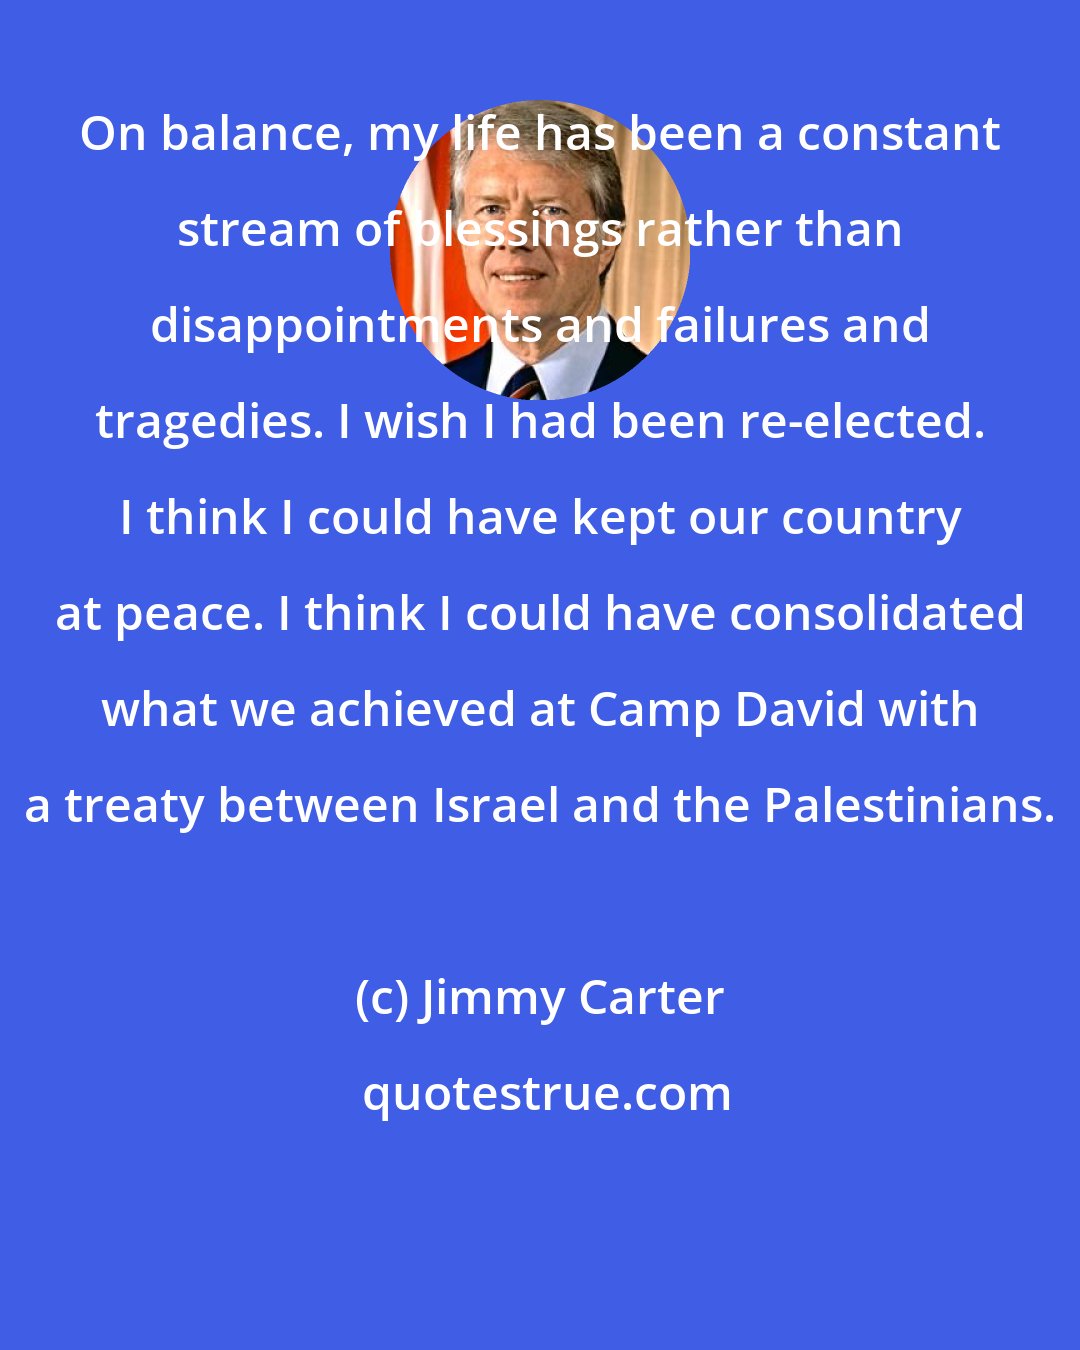 Jimmy Carter: On balance, my life has been a constant stream of blessings rather than disappointments and failures and tragedies. I wish I had been re-elected. I think I could have kept our country at peace. I think I could have consolidated what we achieved at Camp David with a treaty between Israel and the Palestinians.